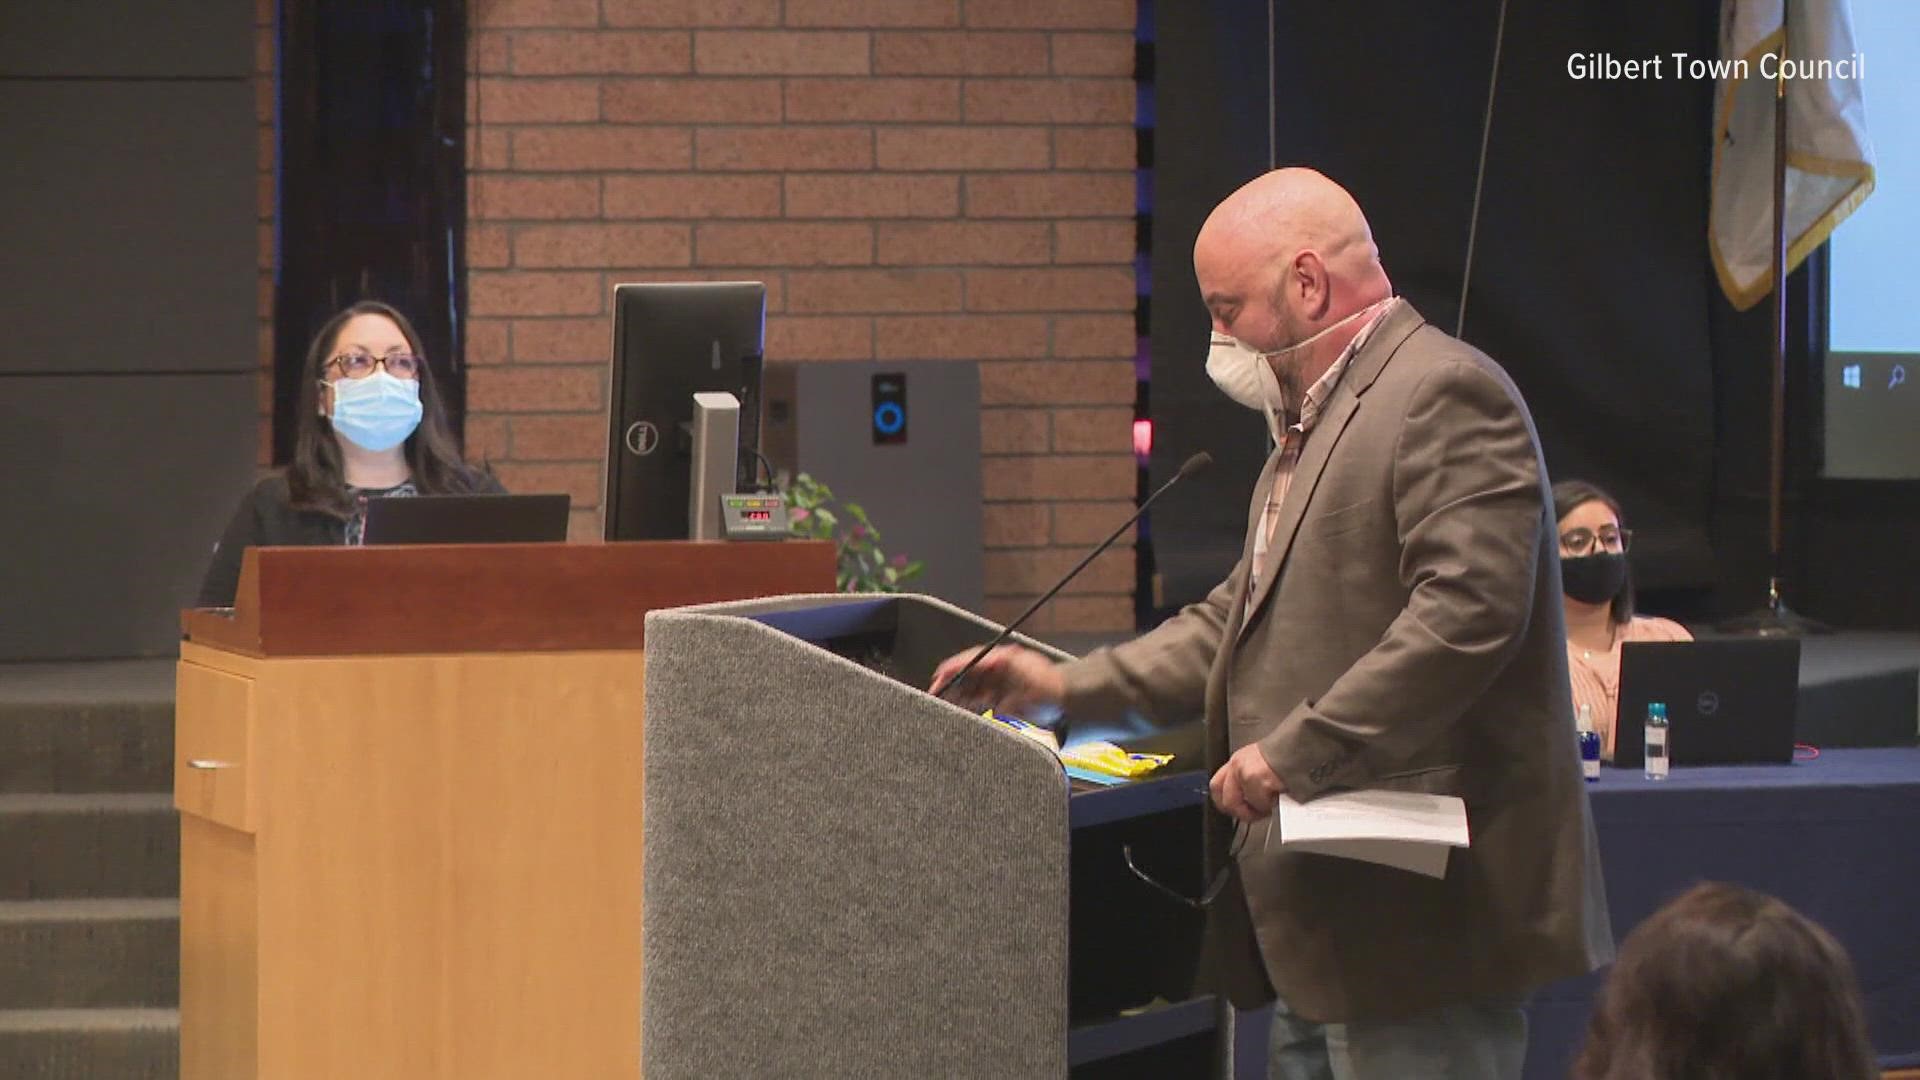 Chris Lineberry speaks at a recent Gilbert Town Council meeting to express concerns for neighborhood safety after the death at the Tilda Manor group home.